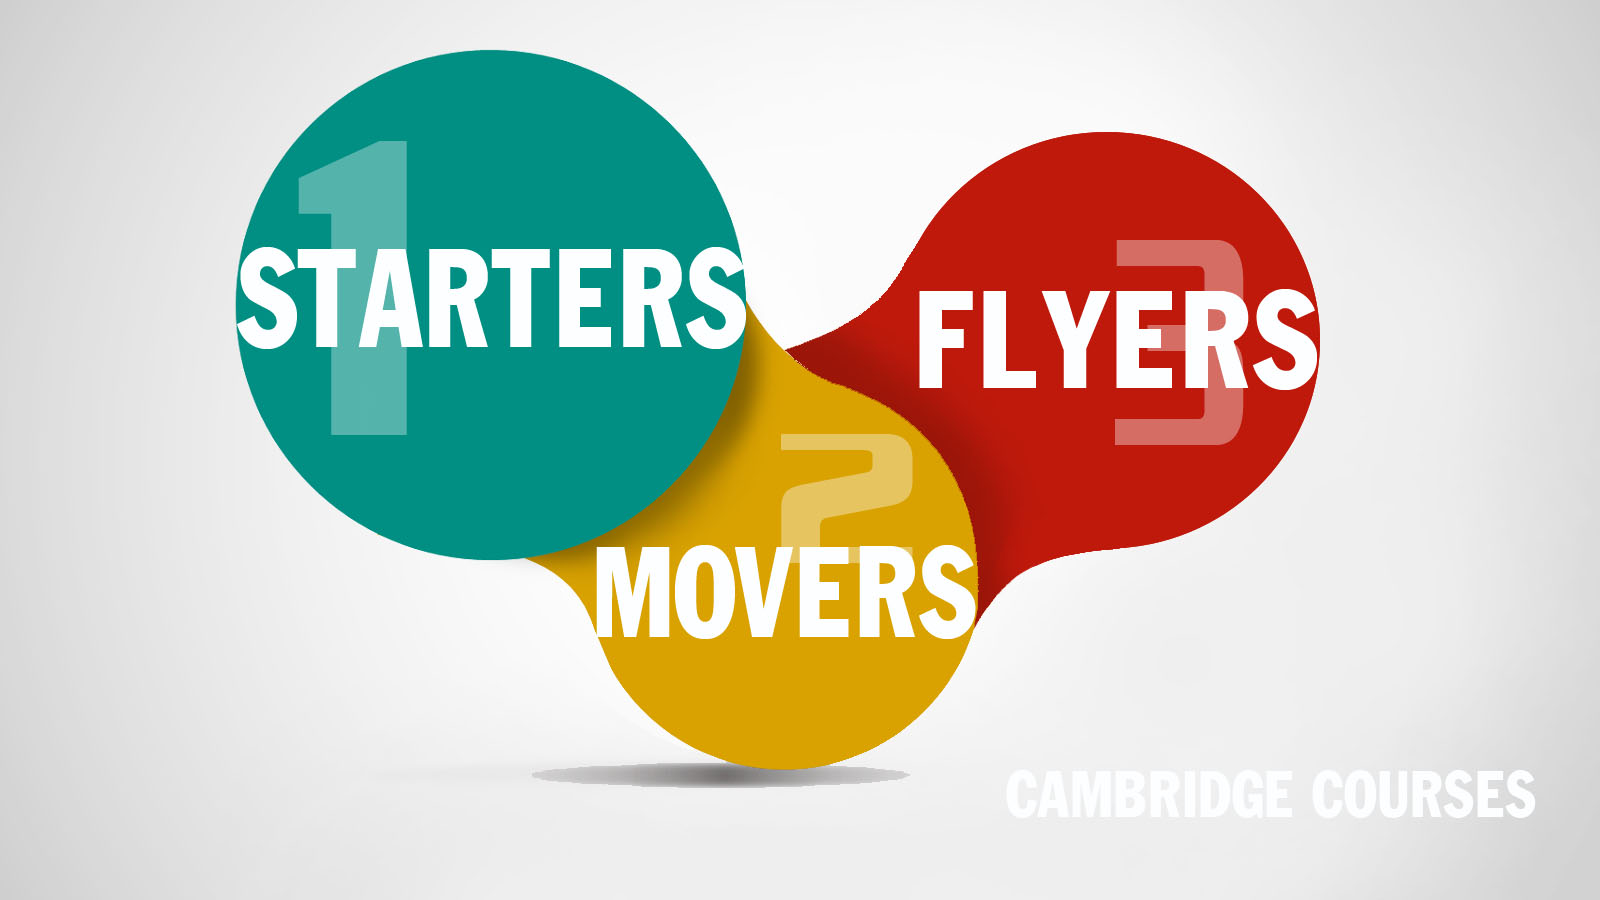 STARTERS-MOVERS-FLYERS